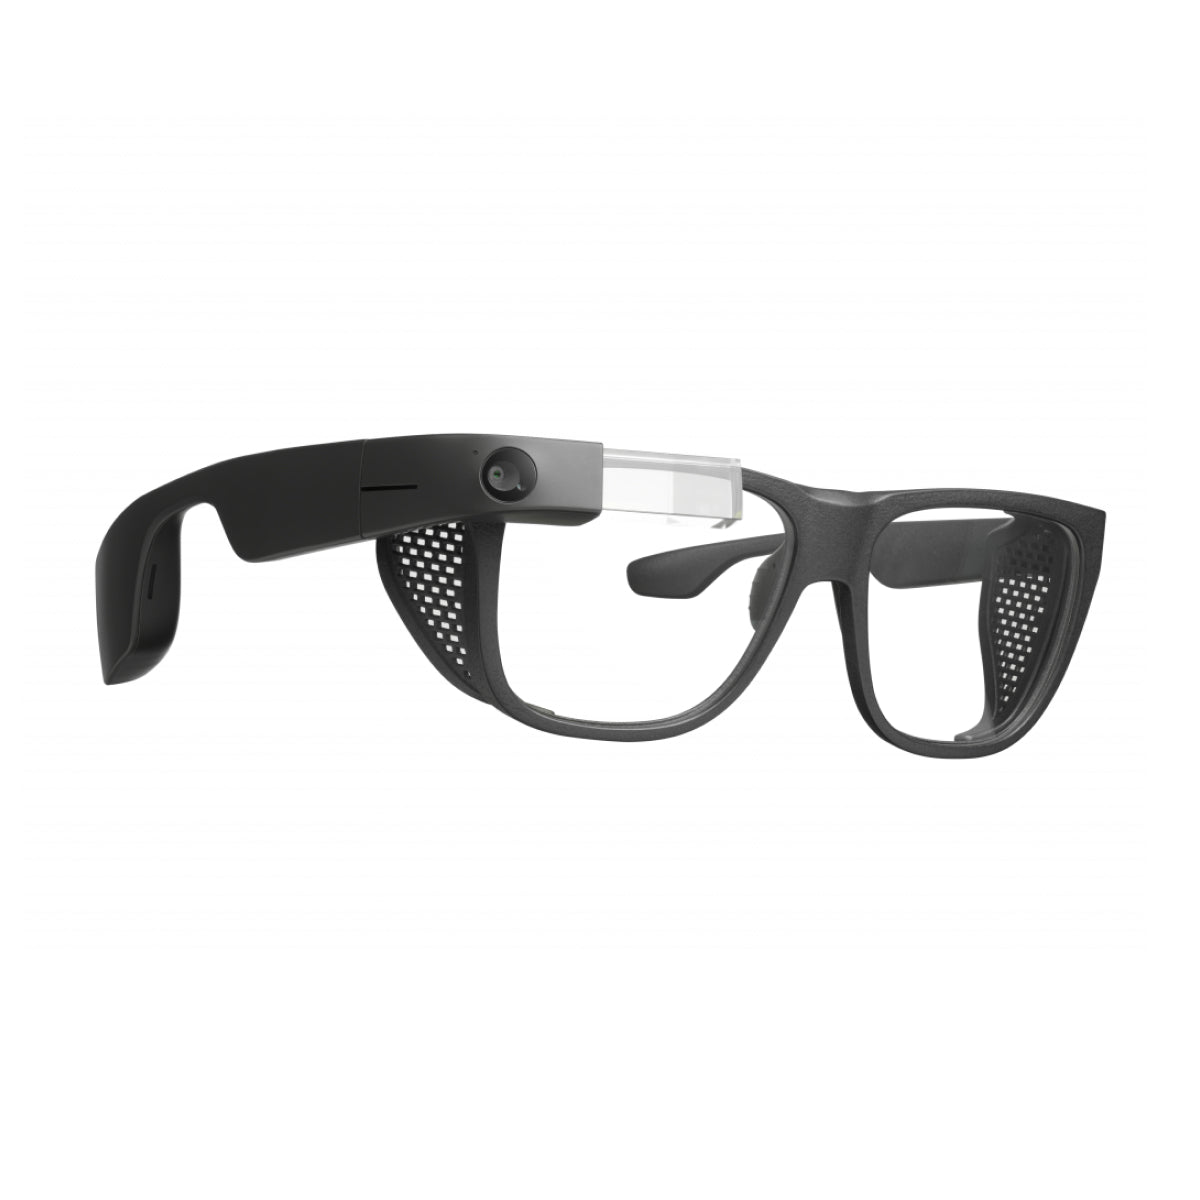 Photo of the Envision Glasses with the Smith Optics Frames (Side view)